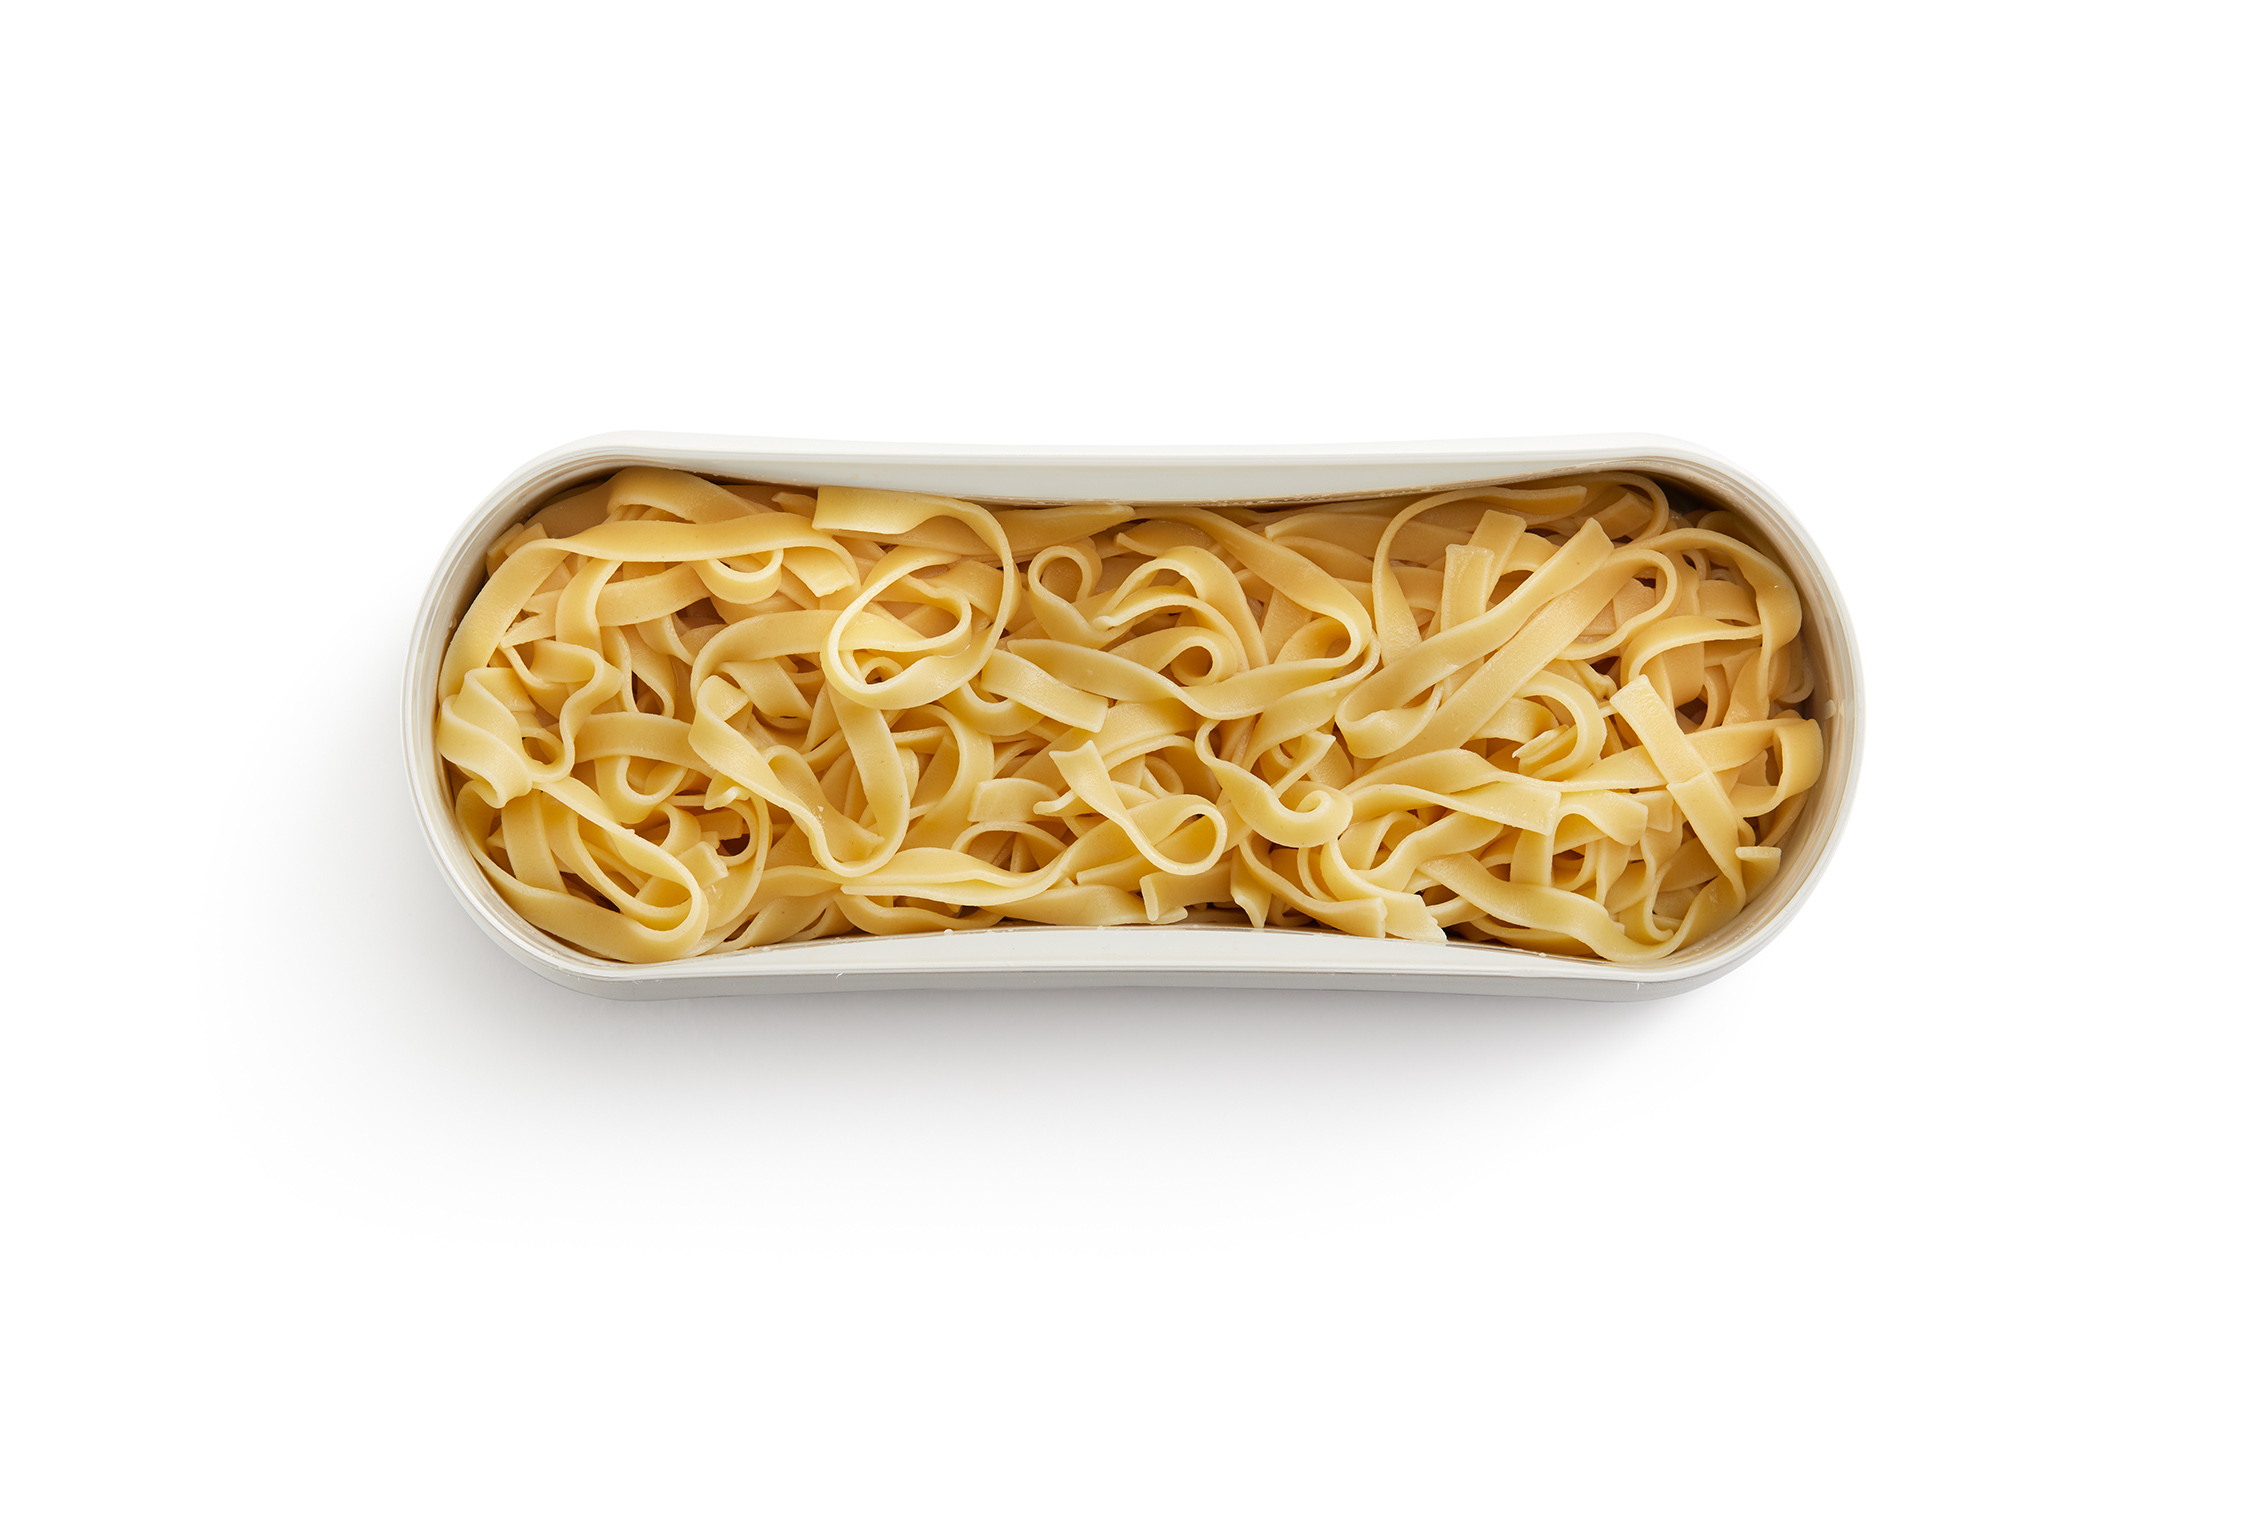 Use for a wide variety of pastas including spaghetti, short pasta, fresh pasta, and noodles.